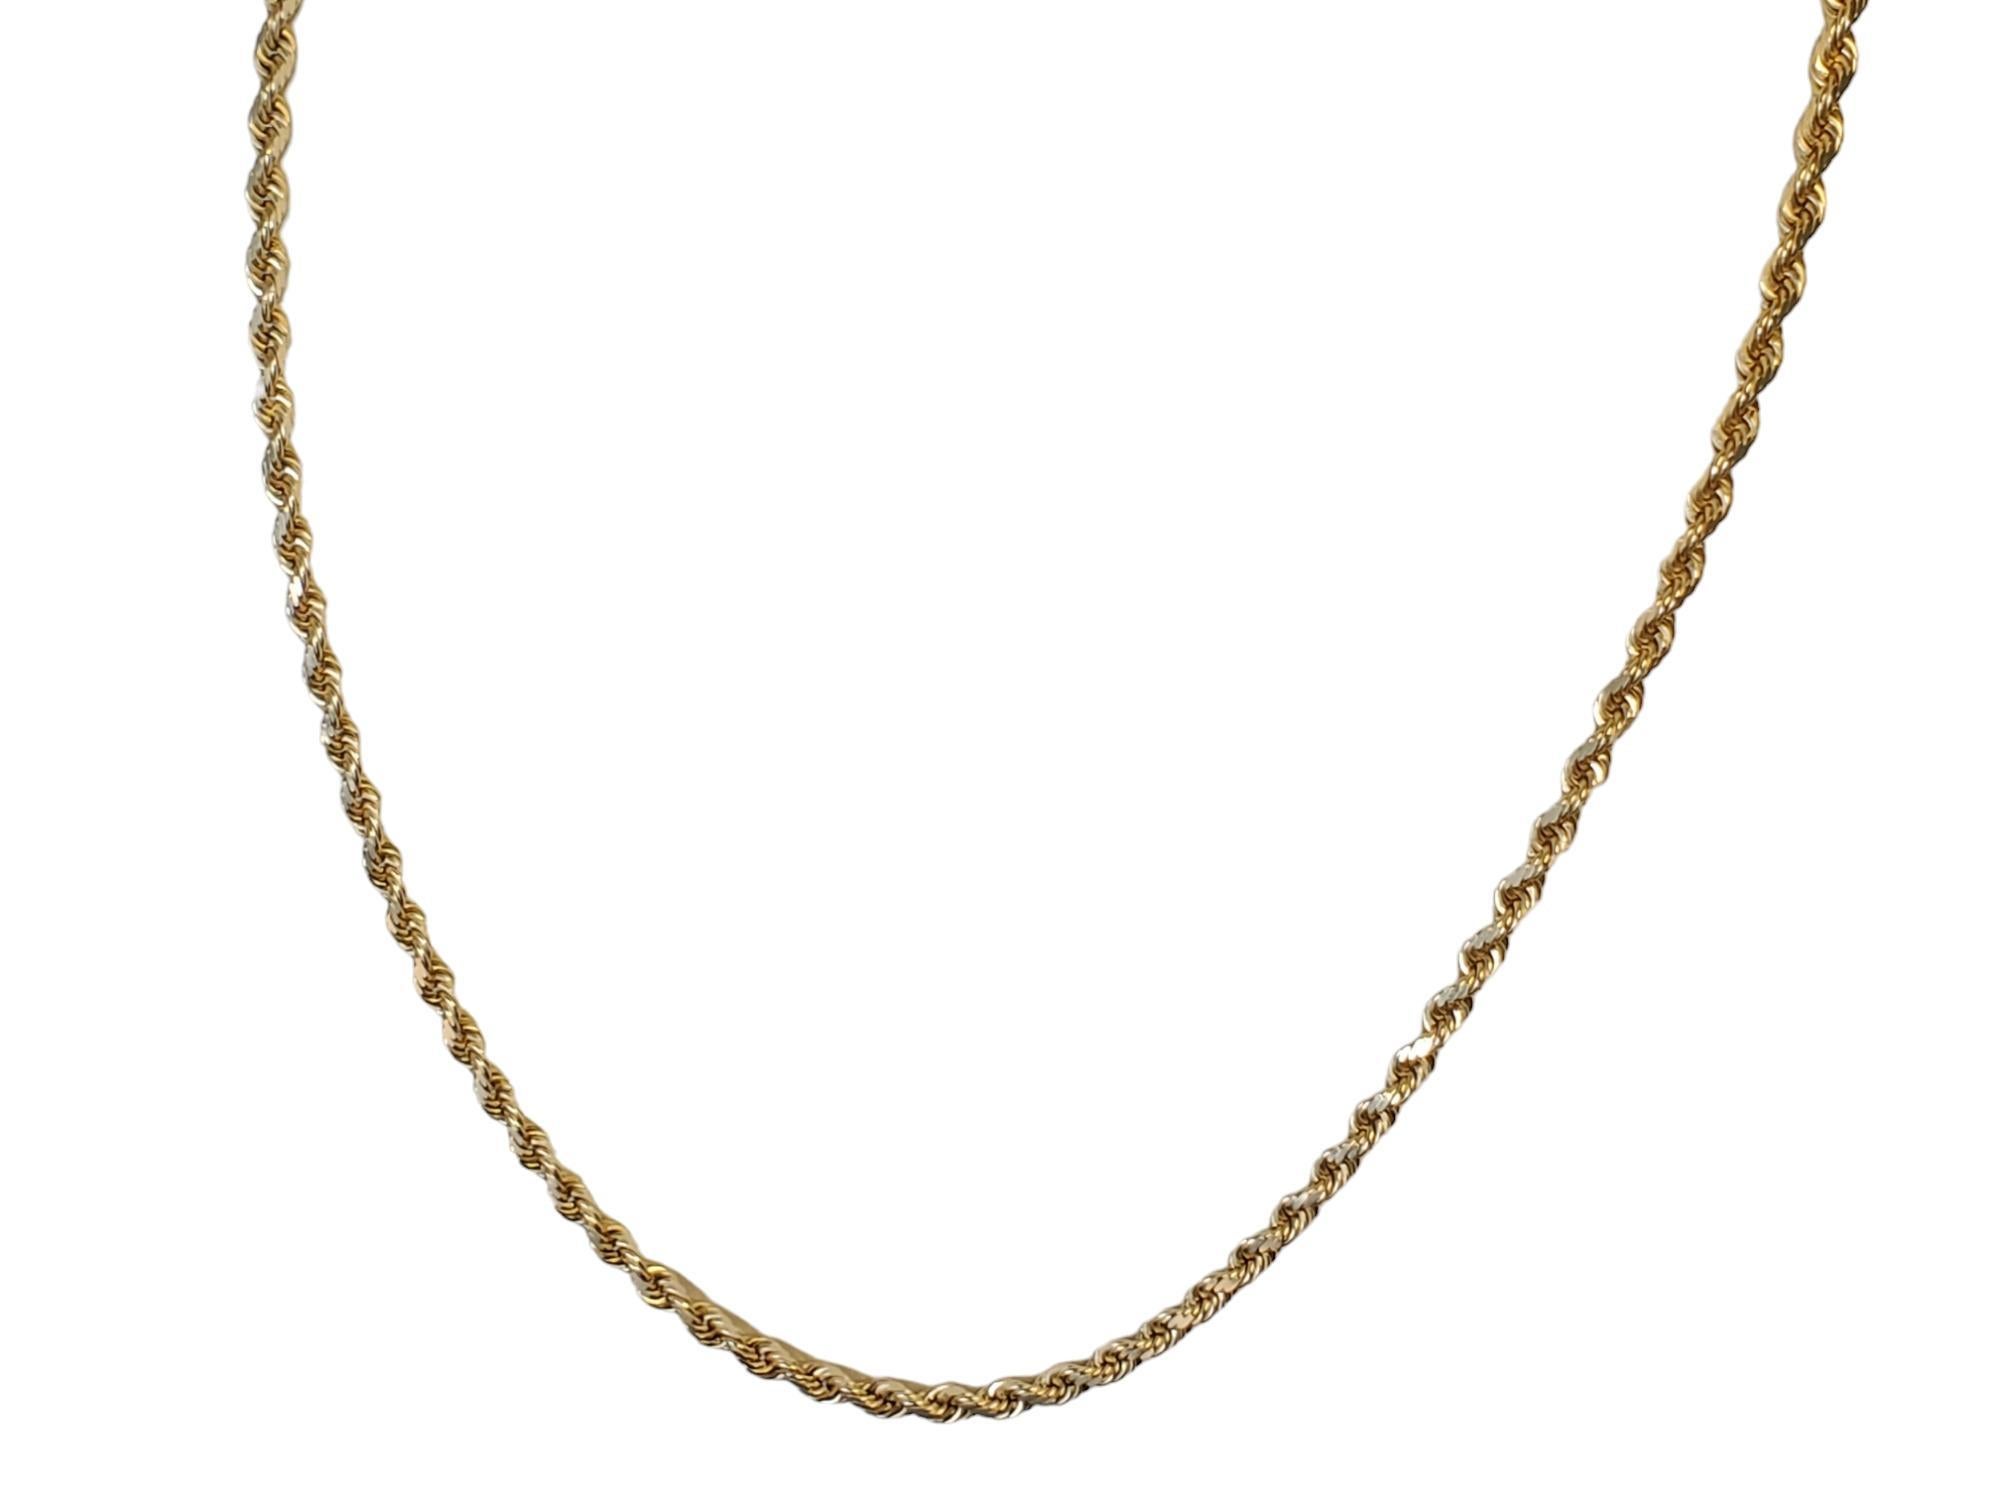 10K Yellow Gold Heavy Diamond Cut Rope Chain Necklace Very Well Made 22